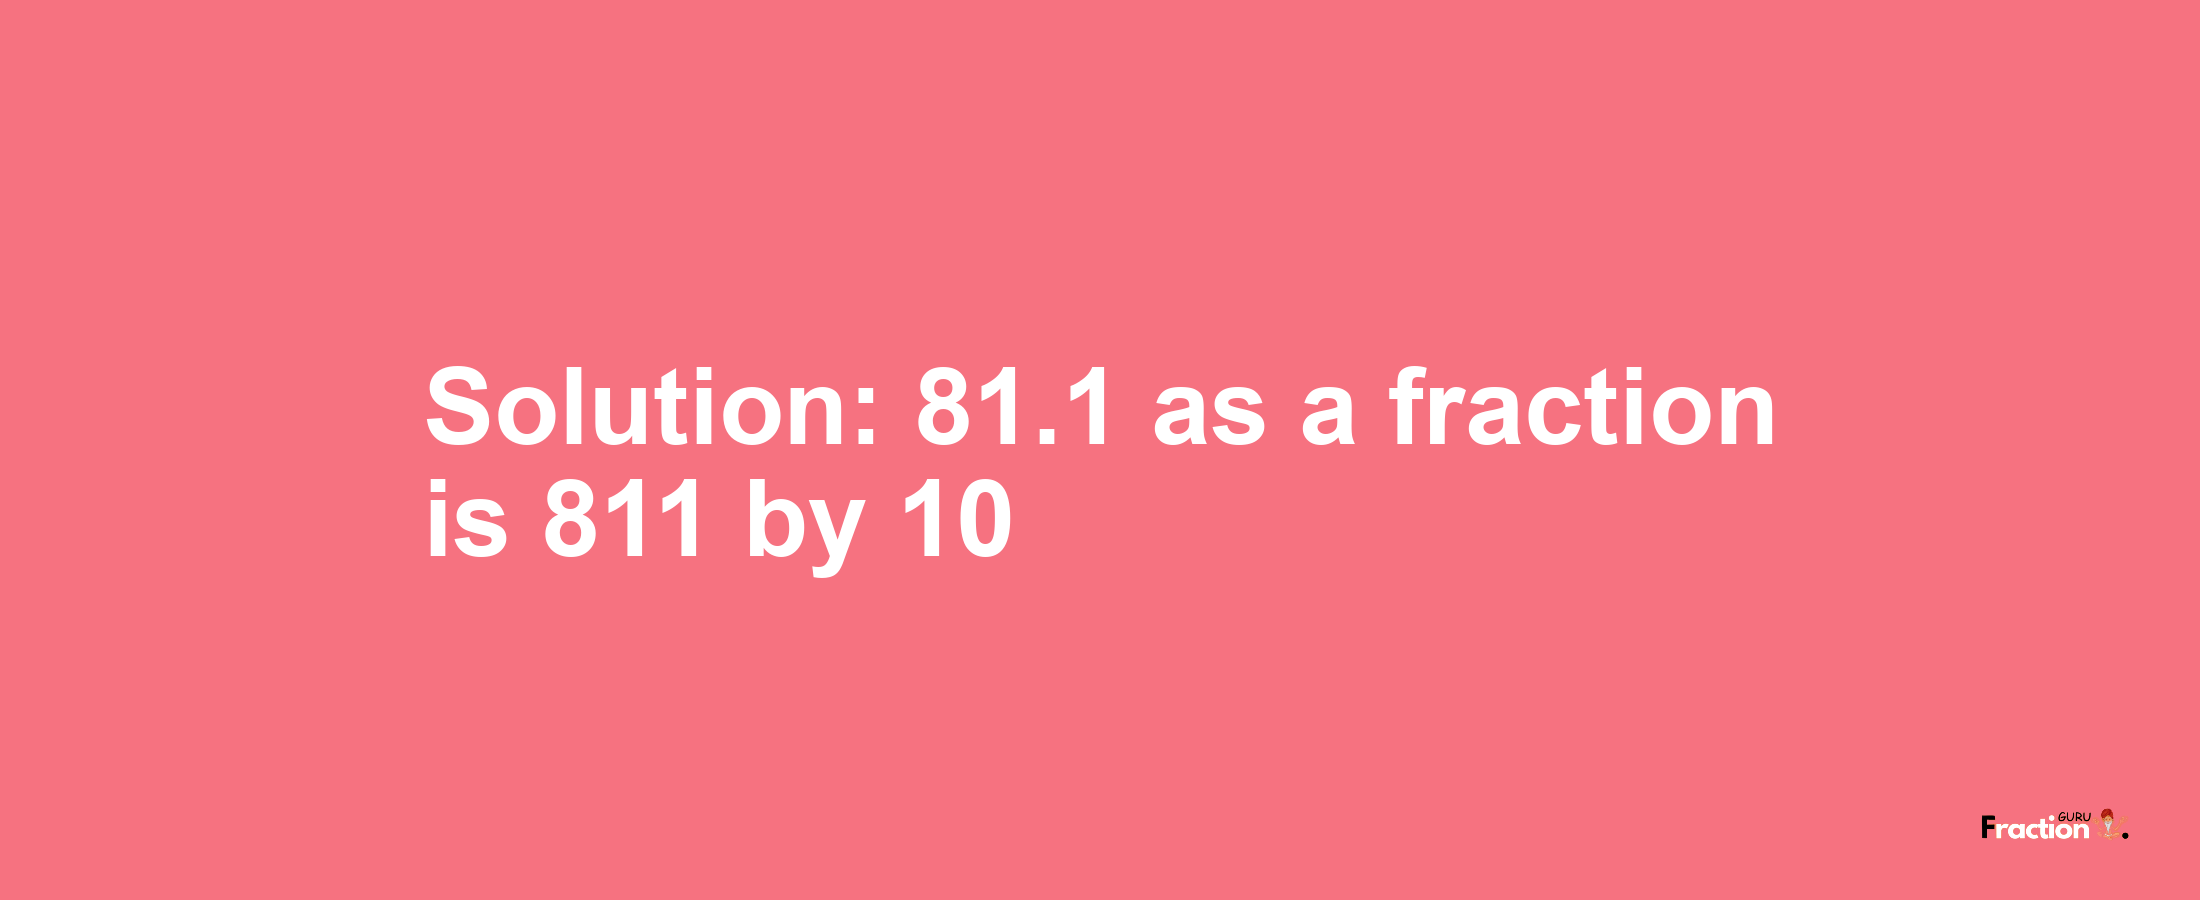 Solution:81.1 as a fraction is 811/10